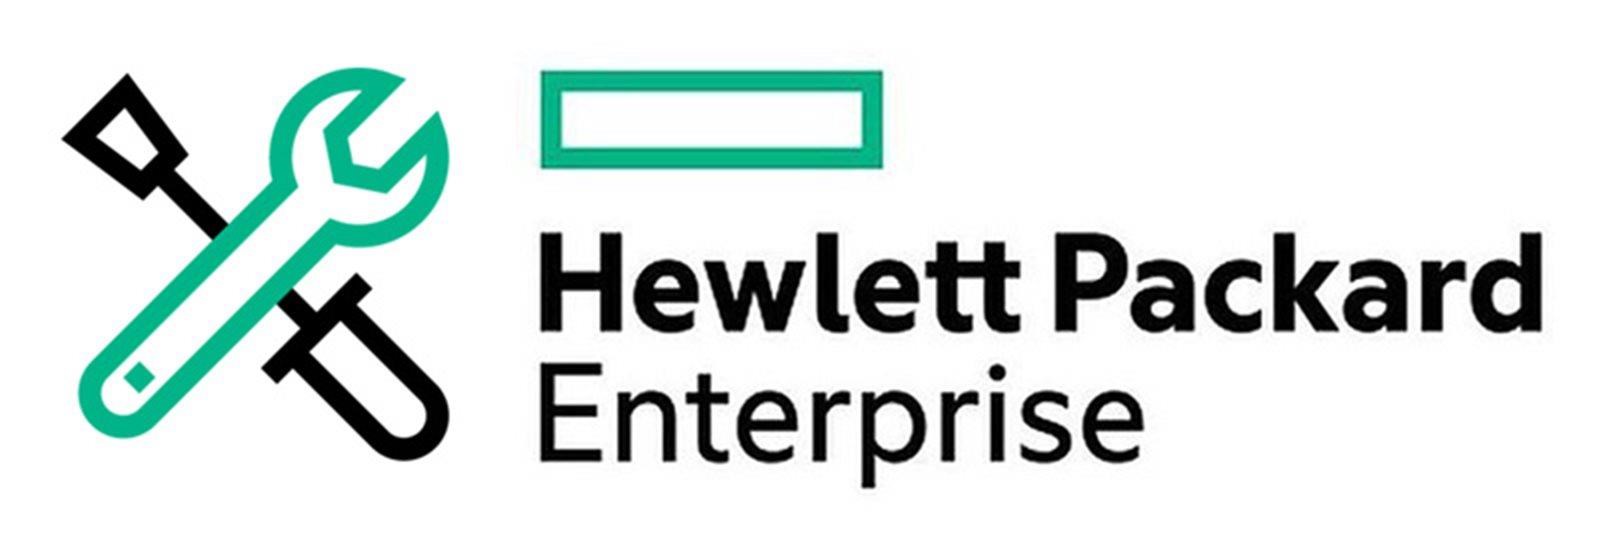 HPE 3Y Foundation Care 24x7 Aruba 5406R Zl2 Switch 4h onsite response 24x7 SW phone support + SW Updates for eligible SW0 